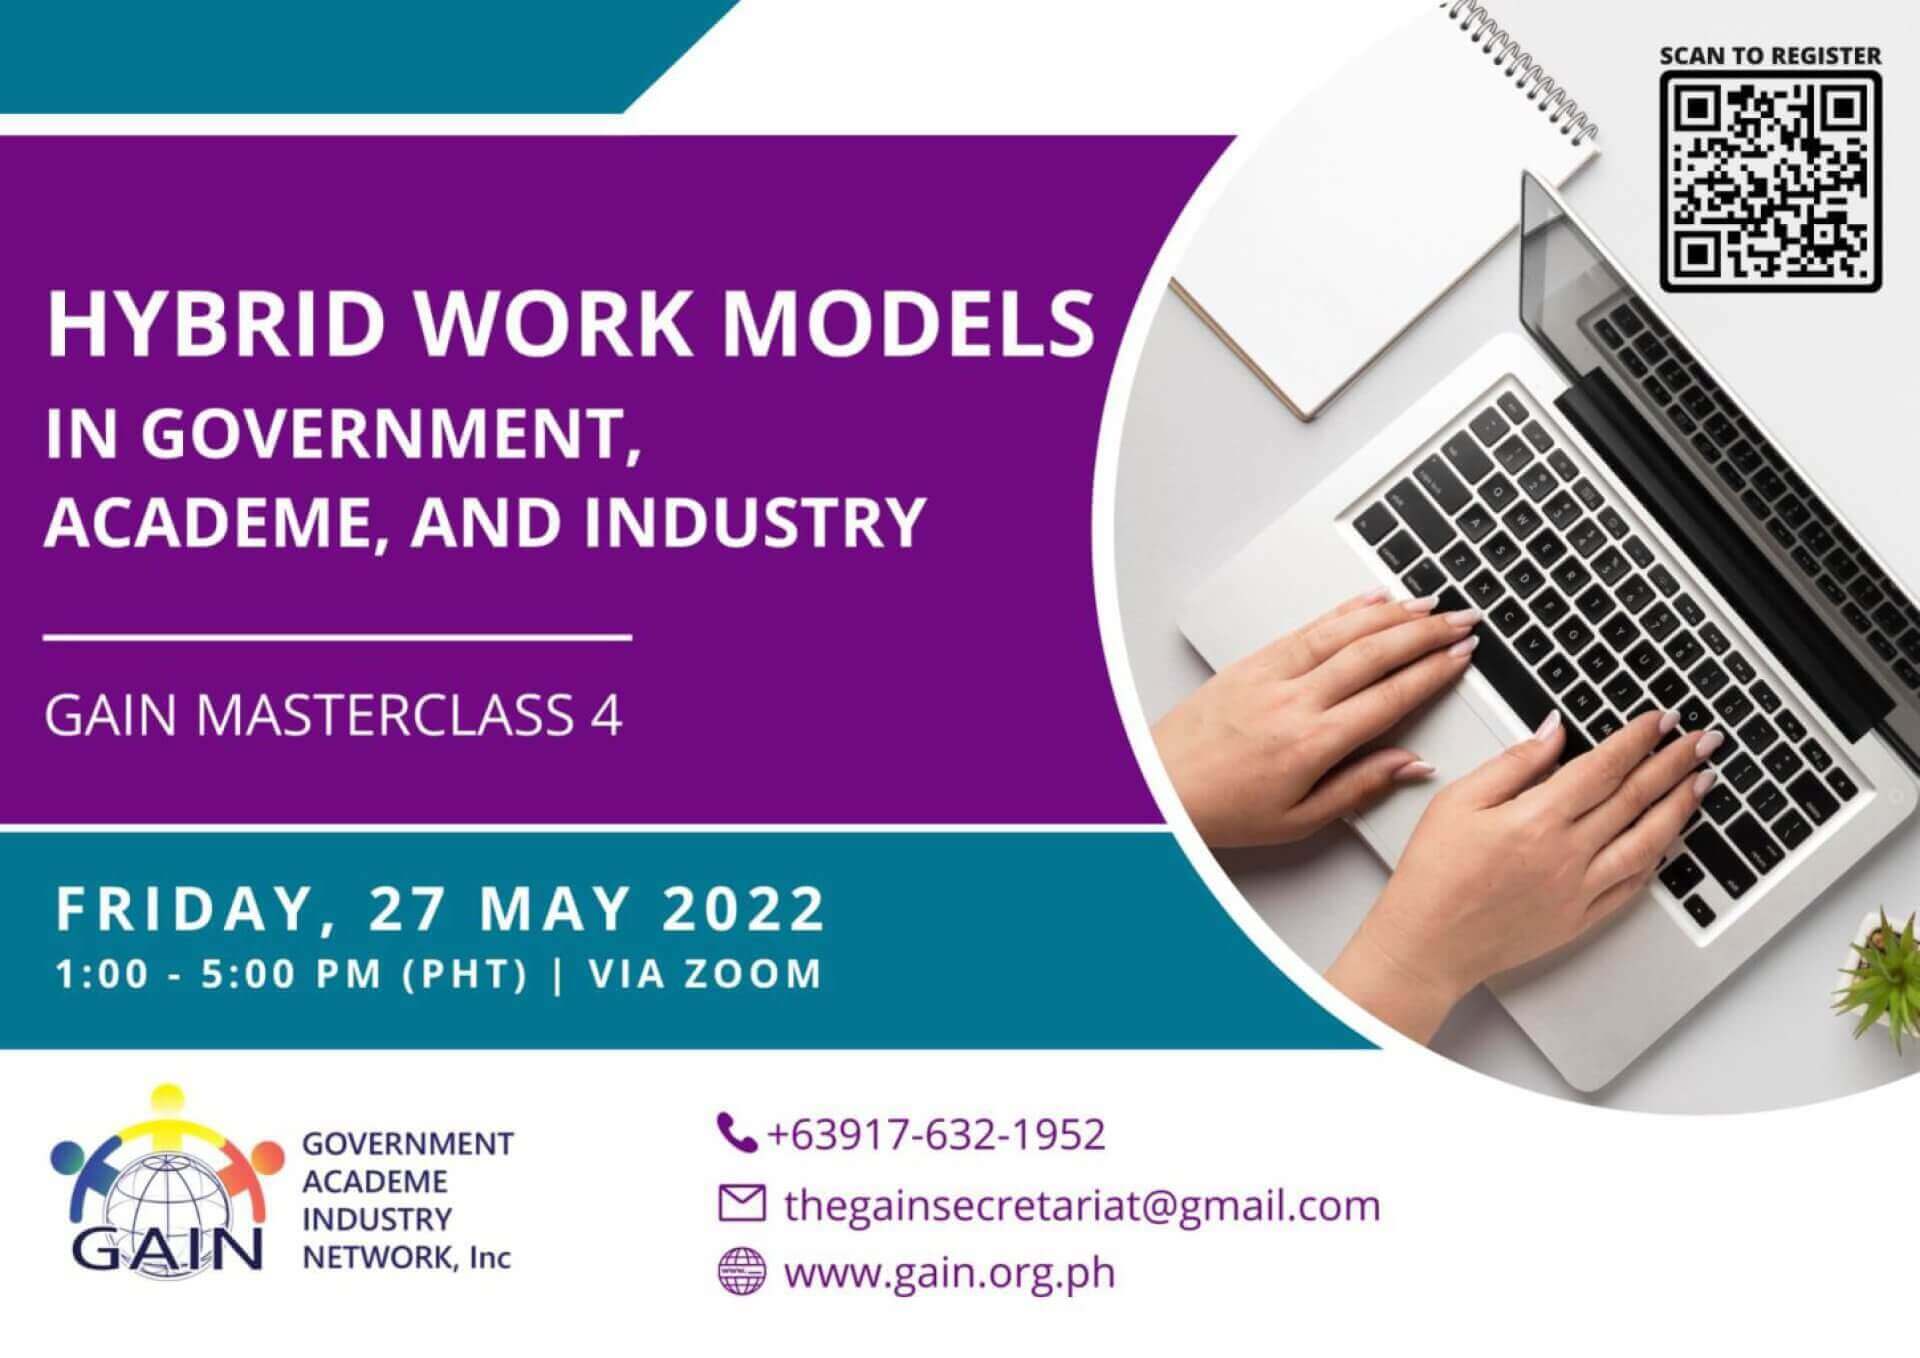 GAIN Masterclass Hybrid Work Models in Government, Academe, and Industry (